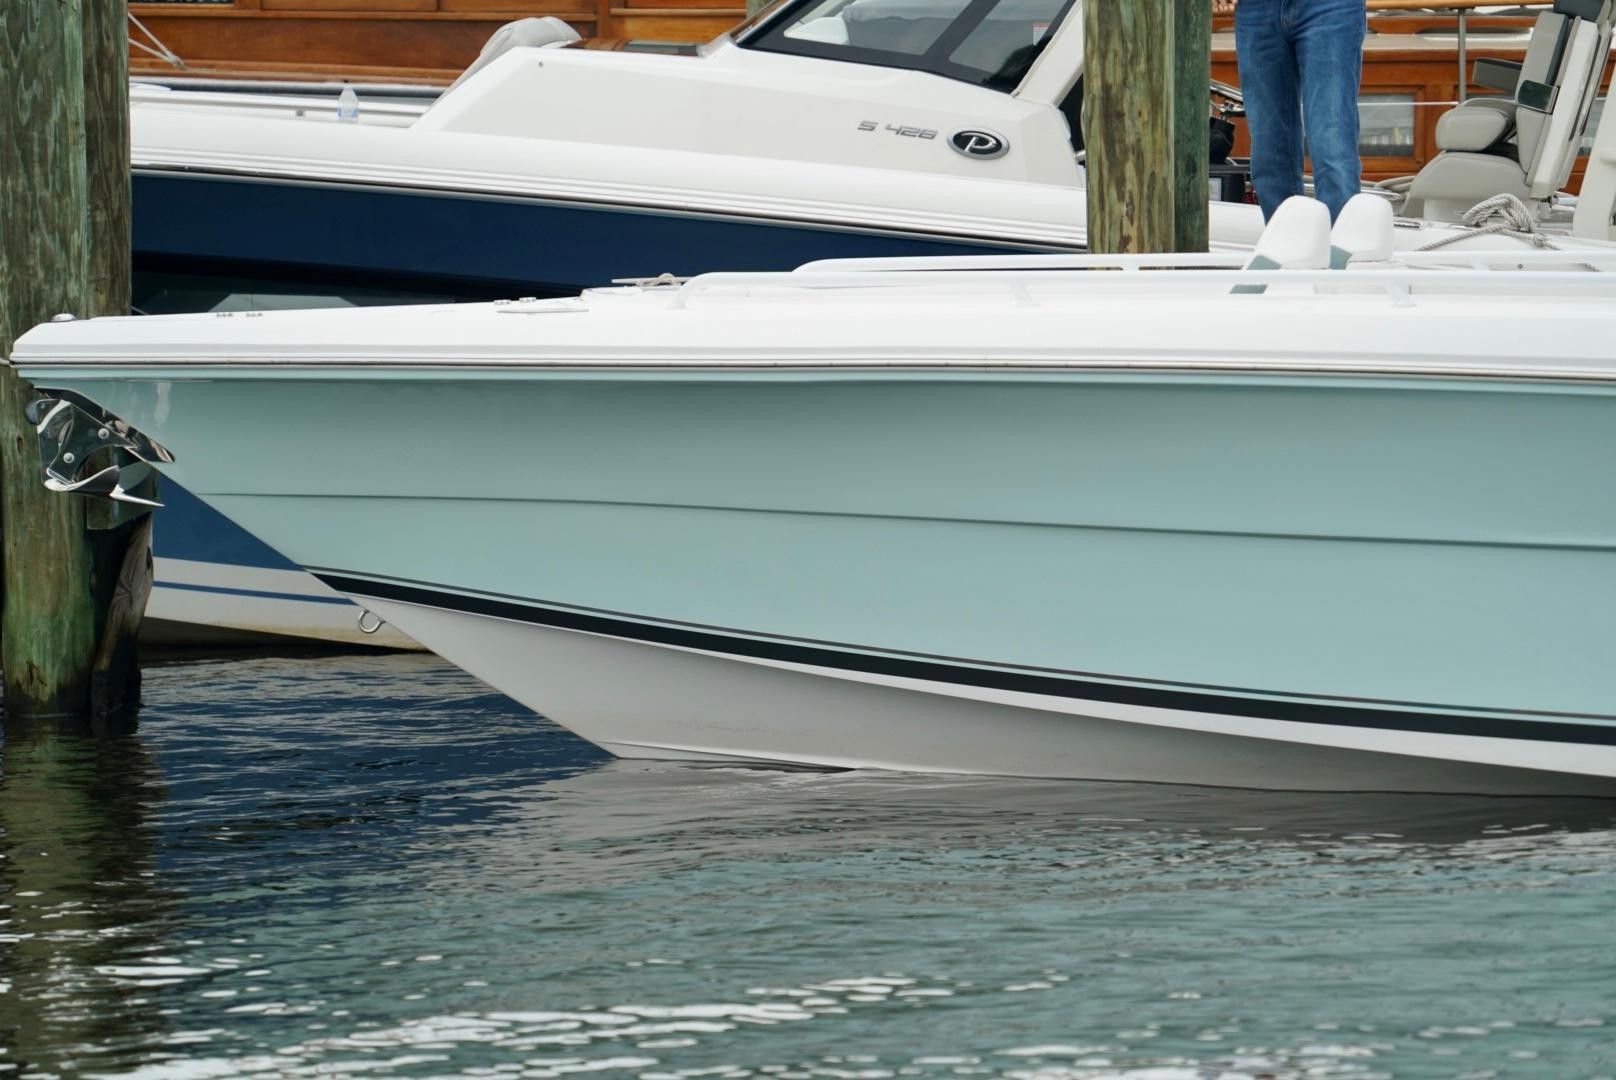 New Power Center Console for Sale 2022 33T Aventura  Boat Highlights